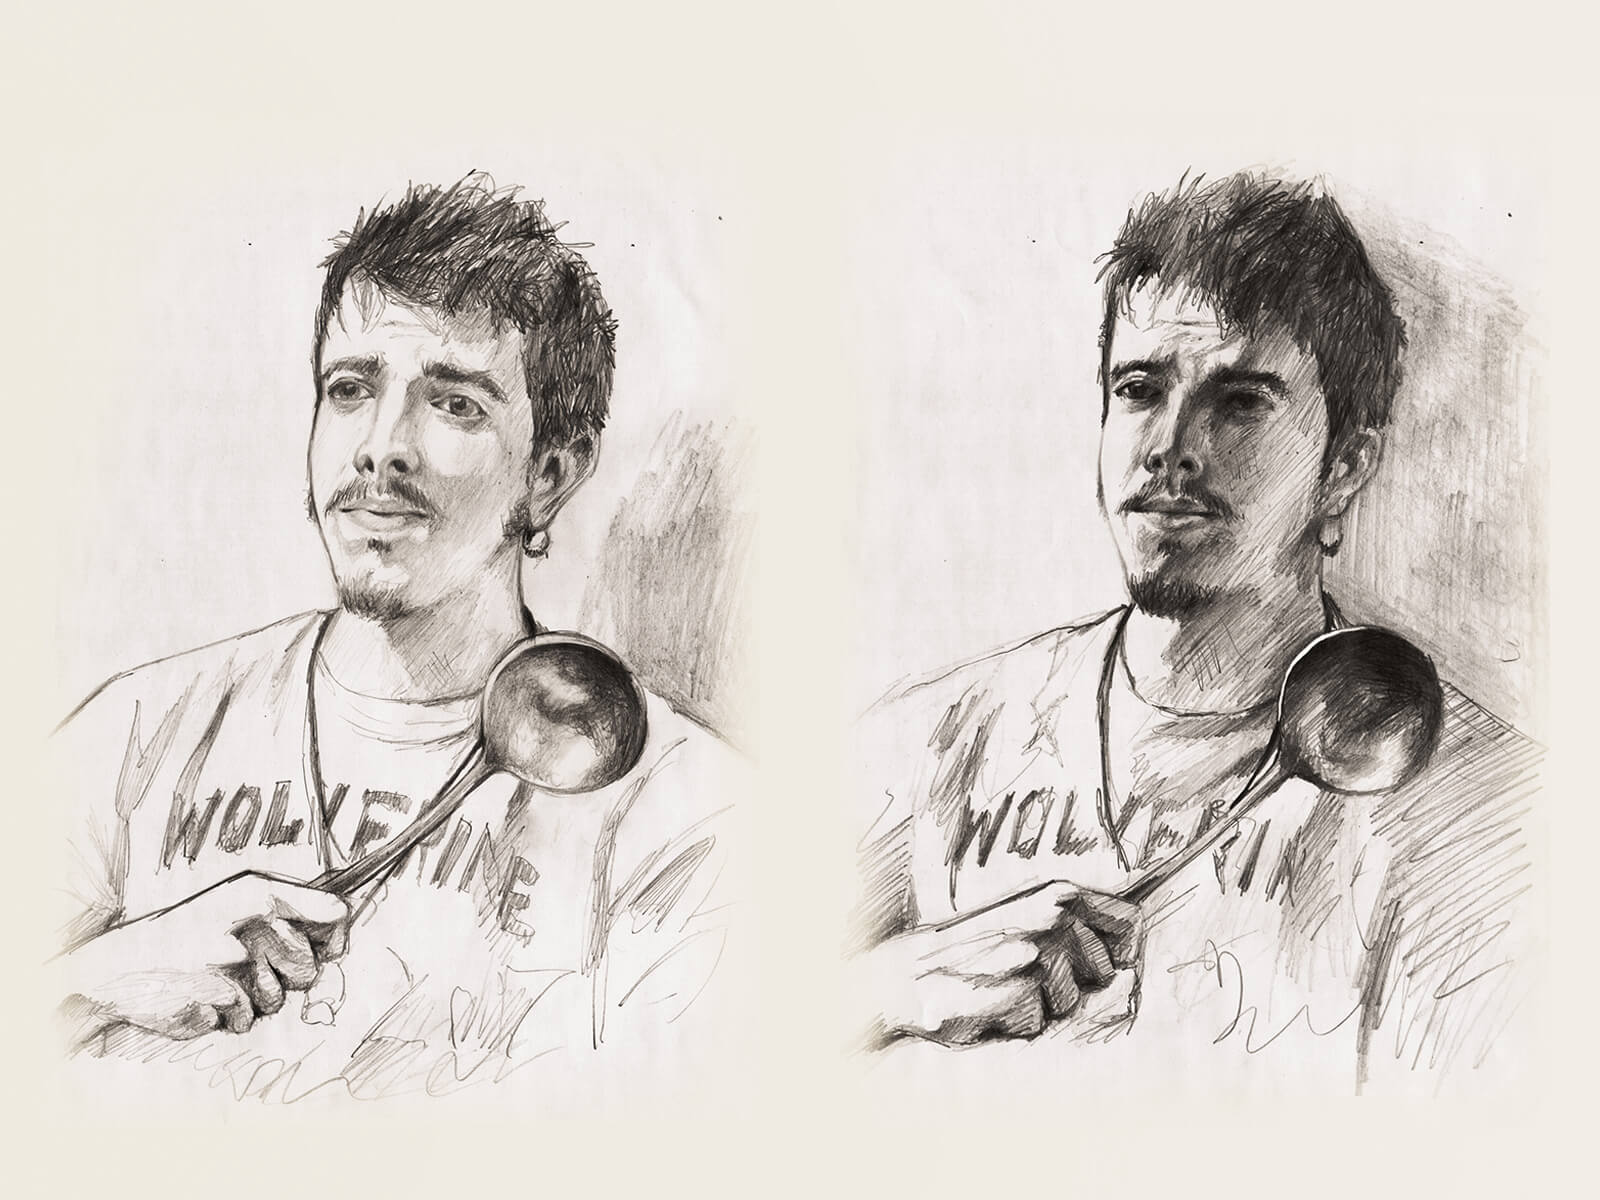 Two portraits in different lighting of a man wearing a shirt reading &quot;wolverine&quot; holding a punch ladle across his chest.